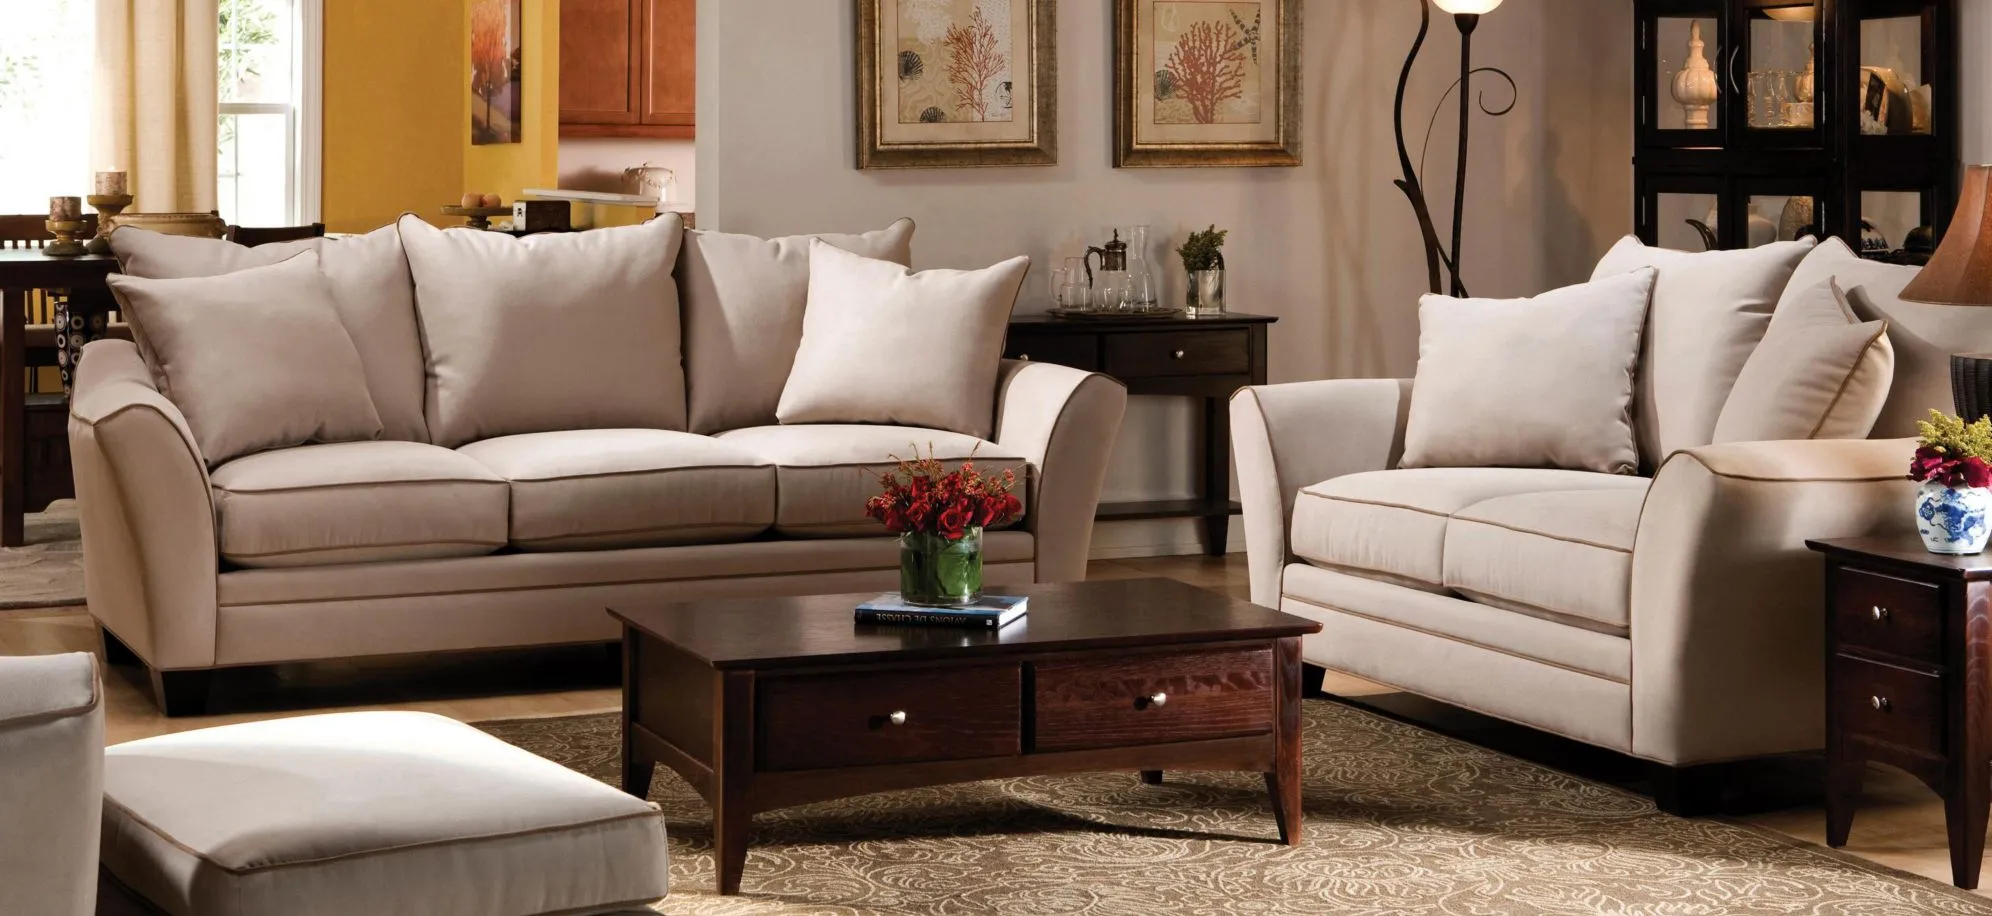 Briarwood 2-pc.. Microfiber Sofa and Loveseat Set in Light Taupe & Khaki by H.M. Richards